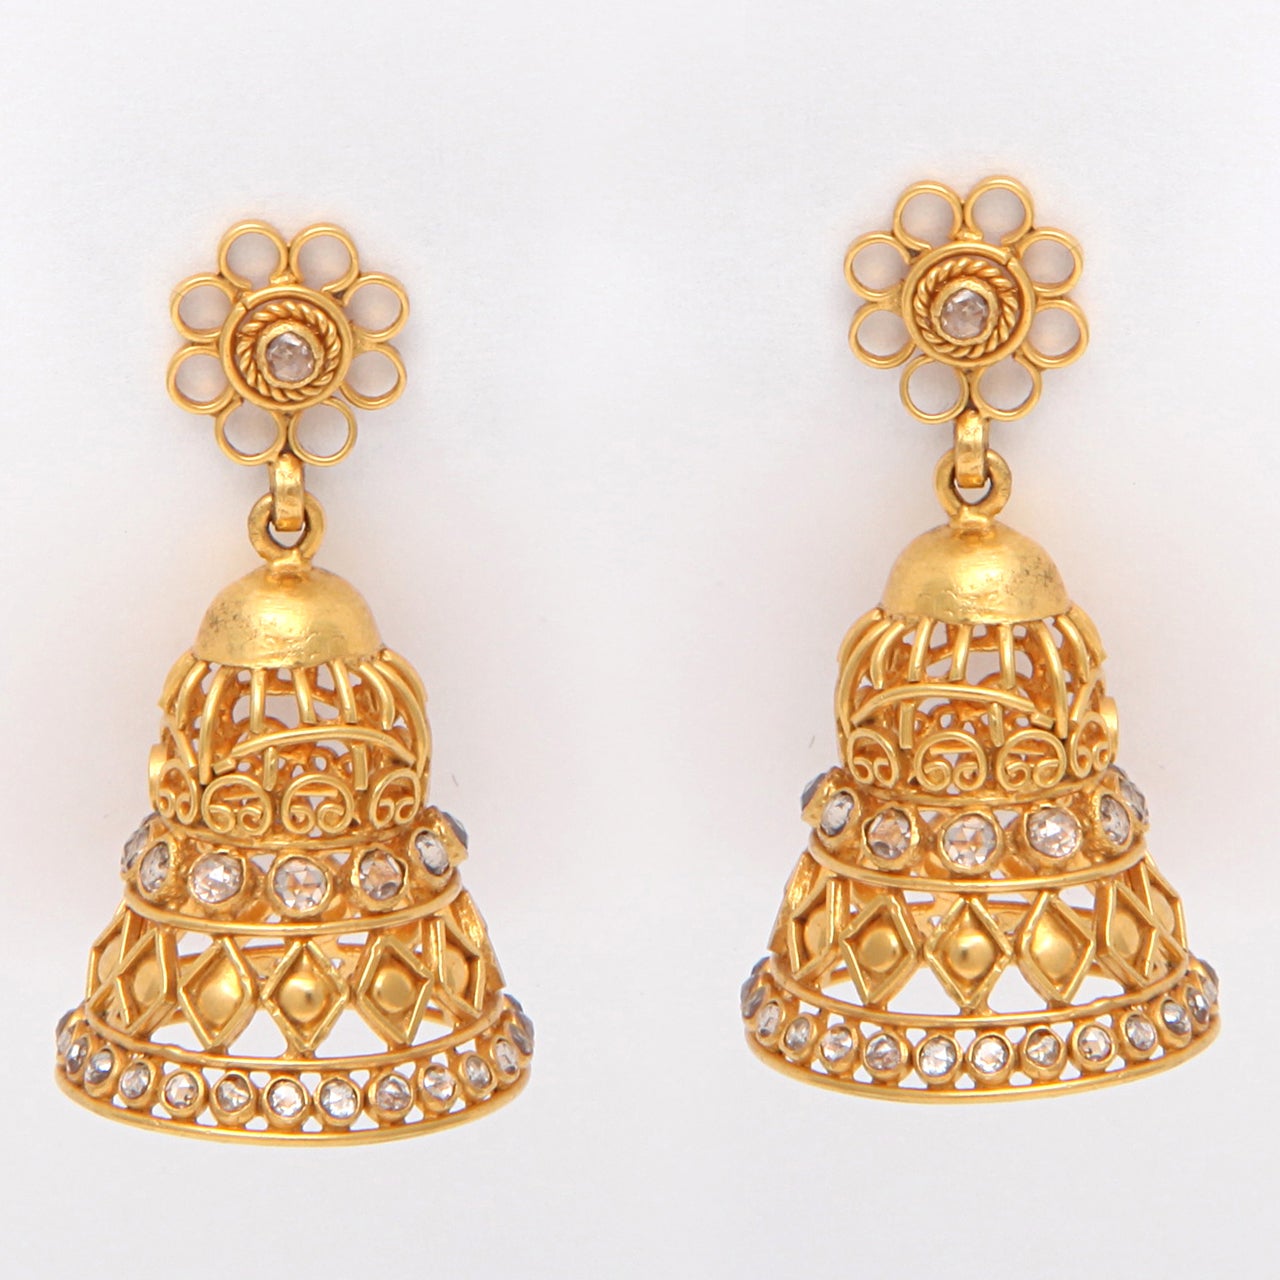 A pair of 18kt yellow gold and diamond bell earrings. The earrings are suspended from 18kt yellow gold and diamond flower studs. There are approximately 2.09cts of diamonds.